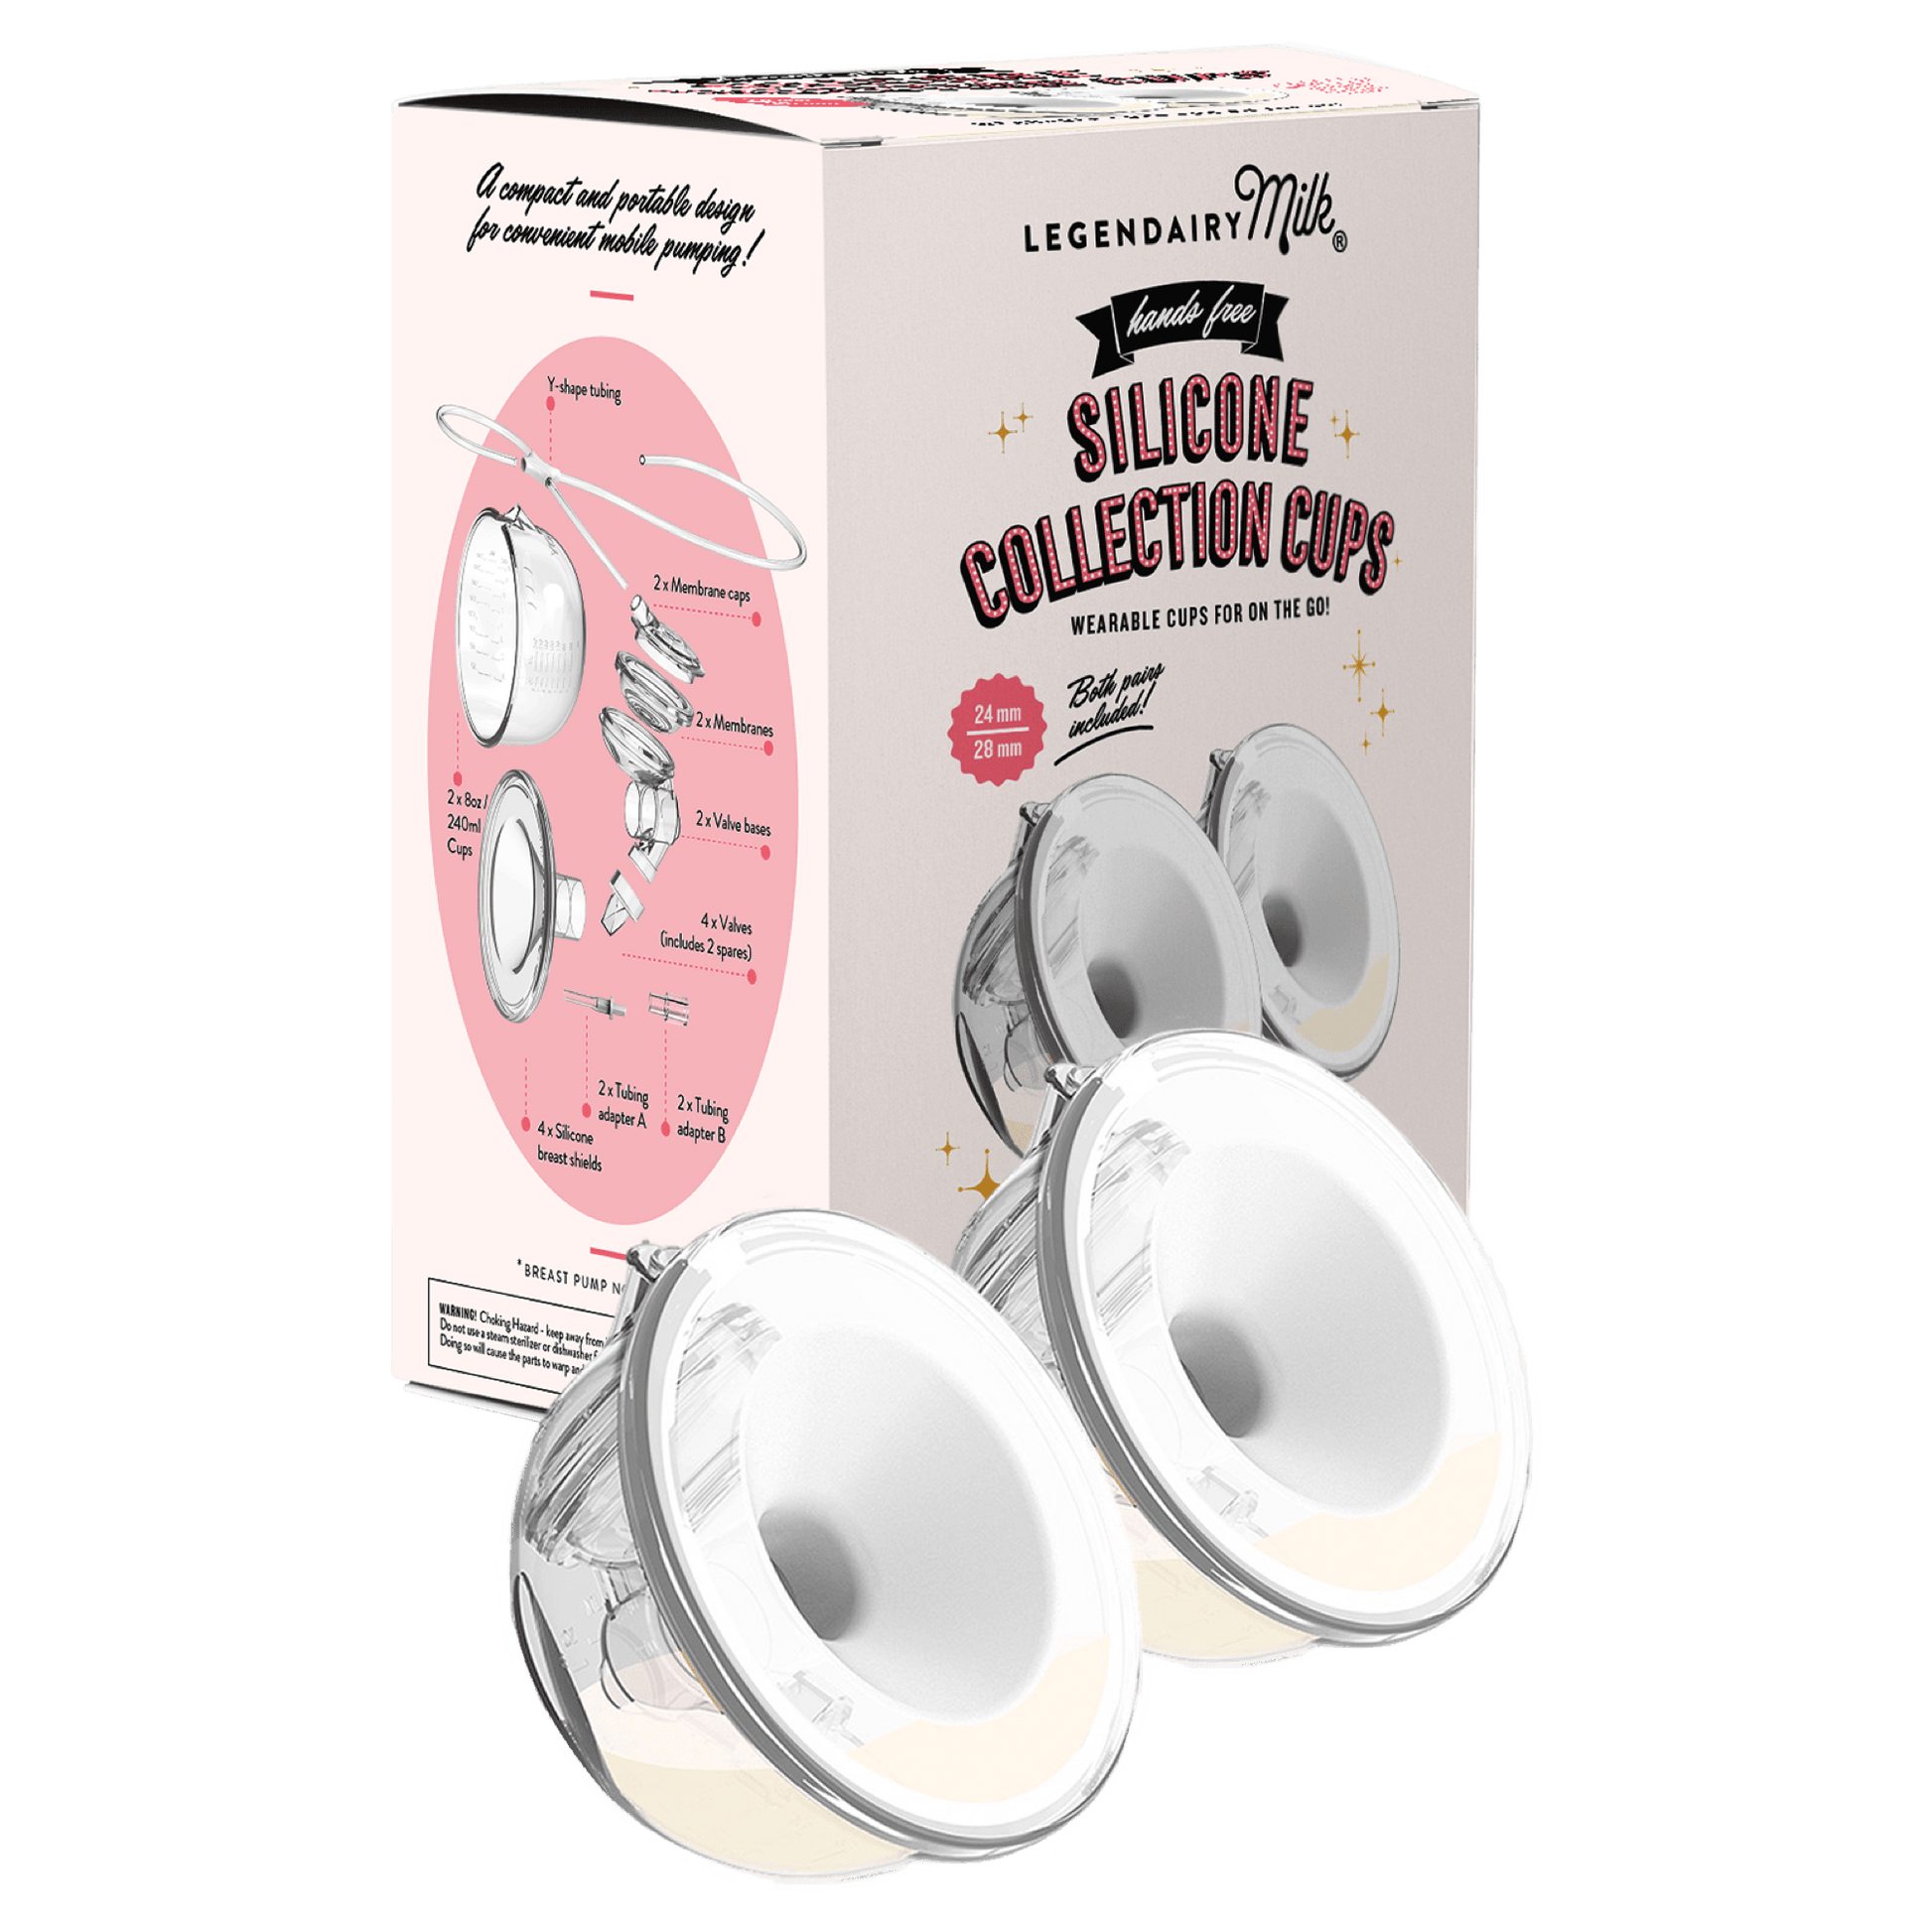 How to hack Bellababy or Baby Buddha breast pumps to work with our Sil –  Legendairy Milk